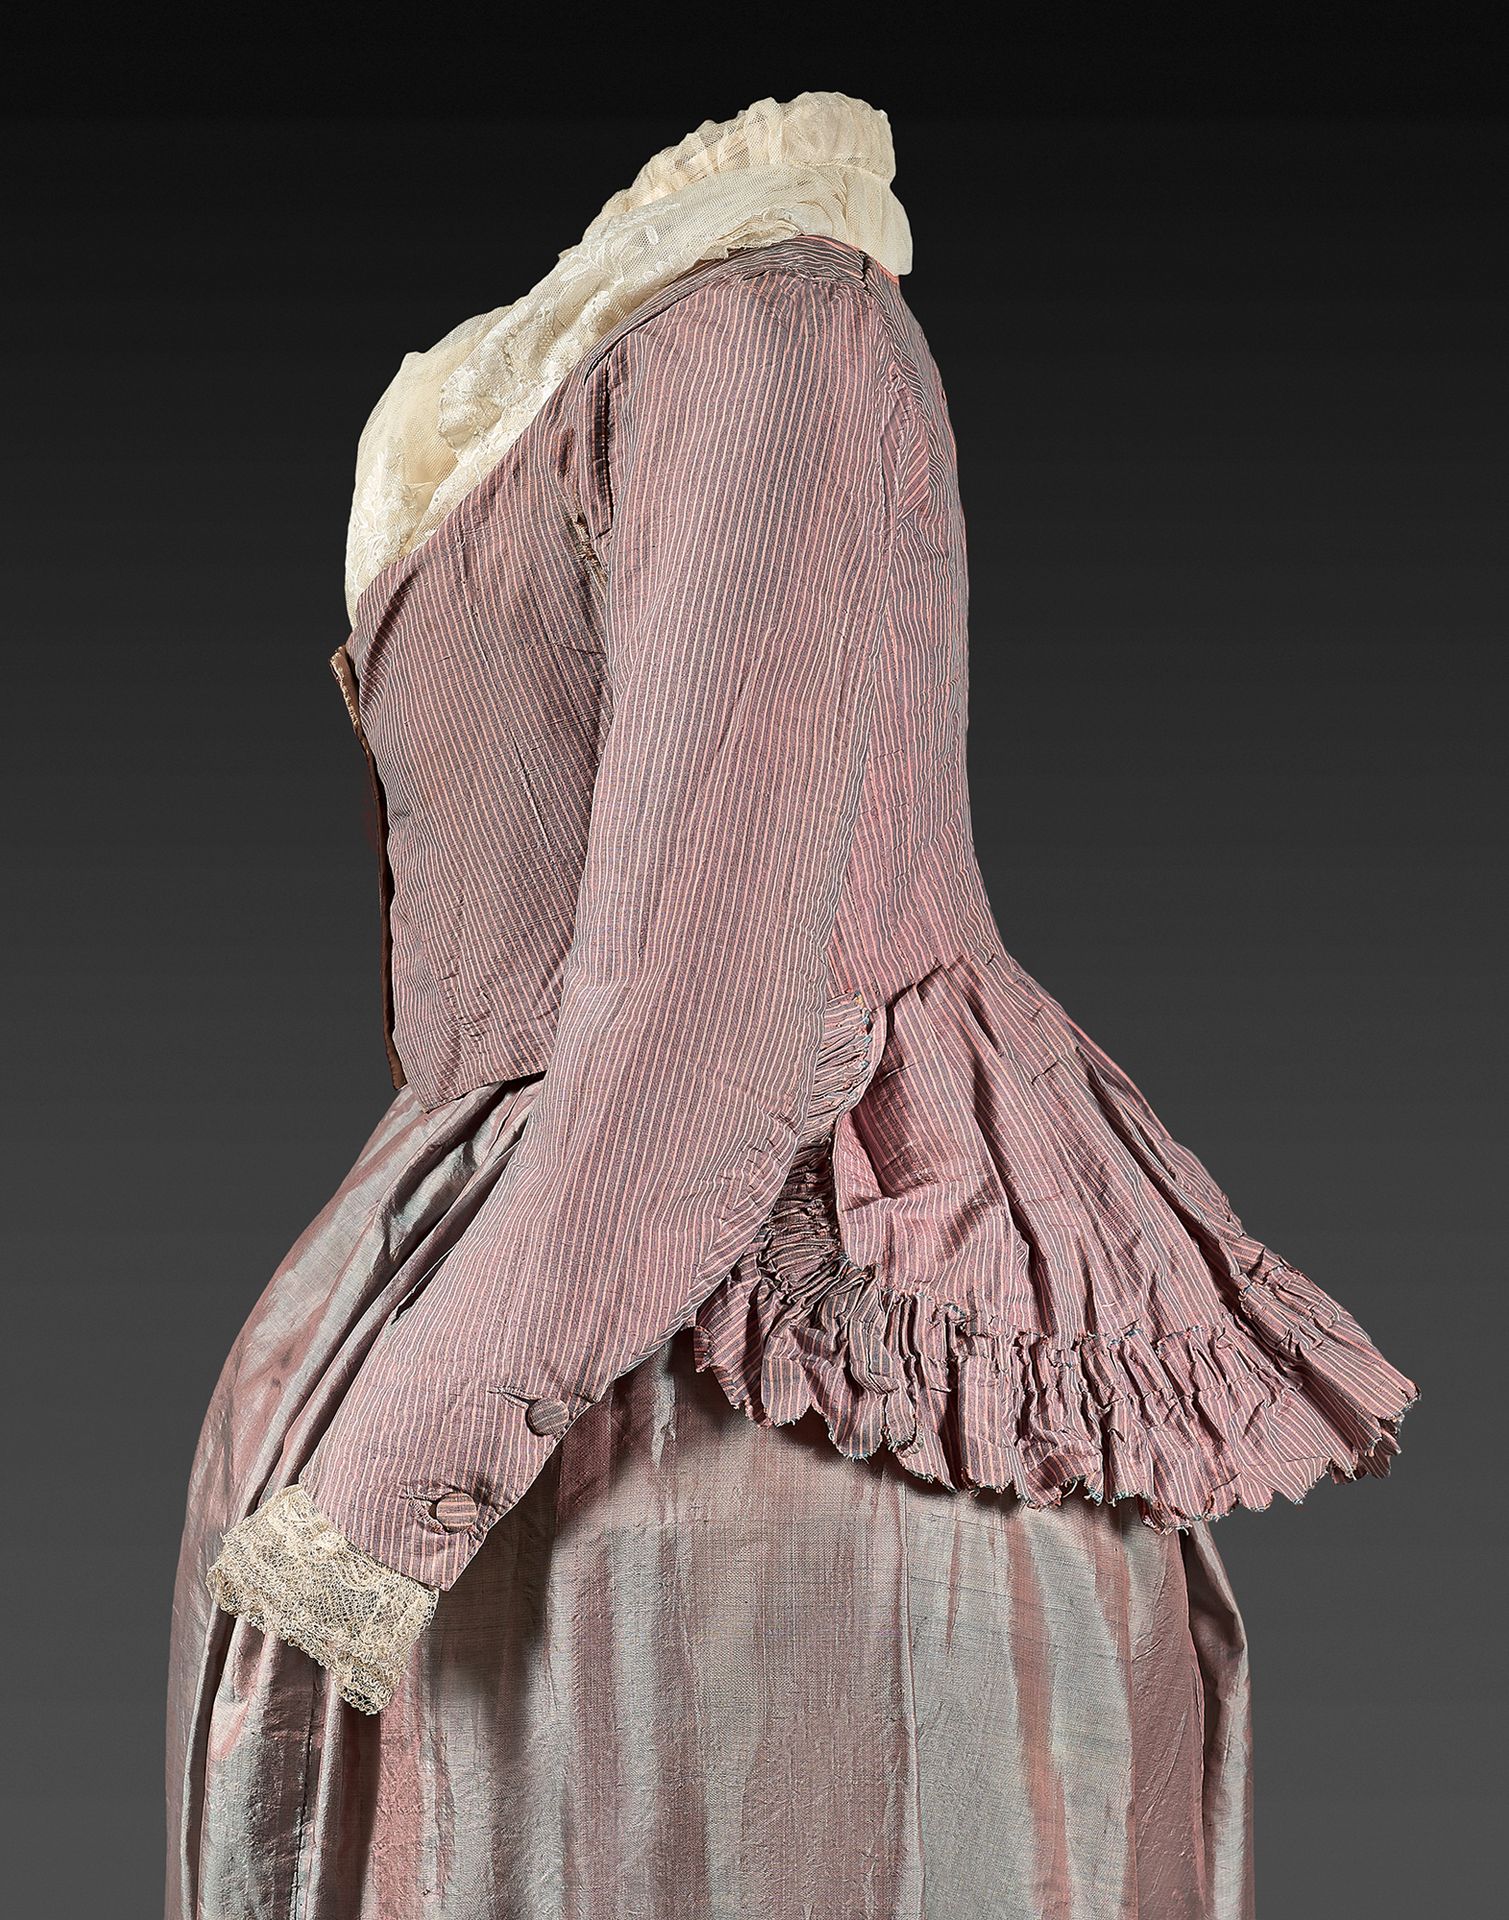 Null Casaquin with basque, Provence, circa 1770-1780.
In pink and blue striped s&hellip;